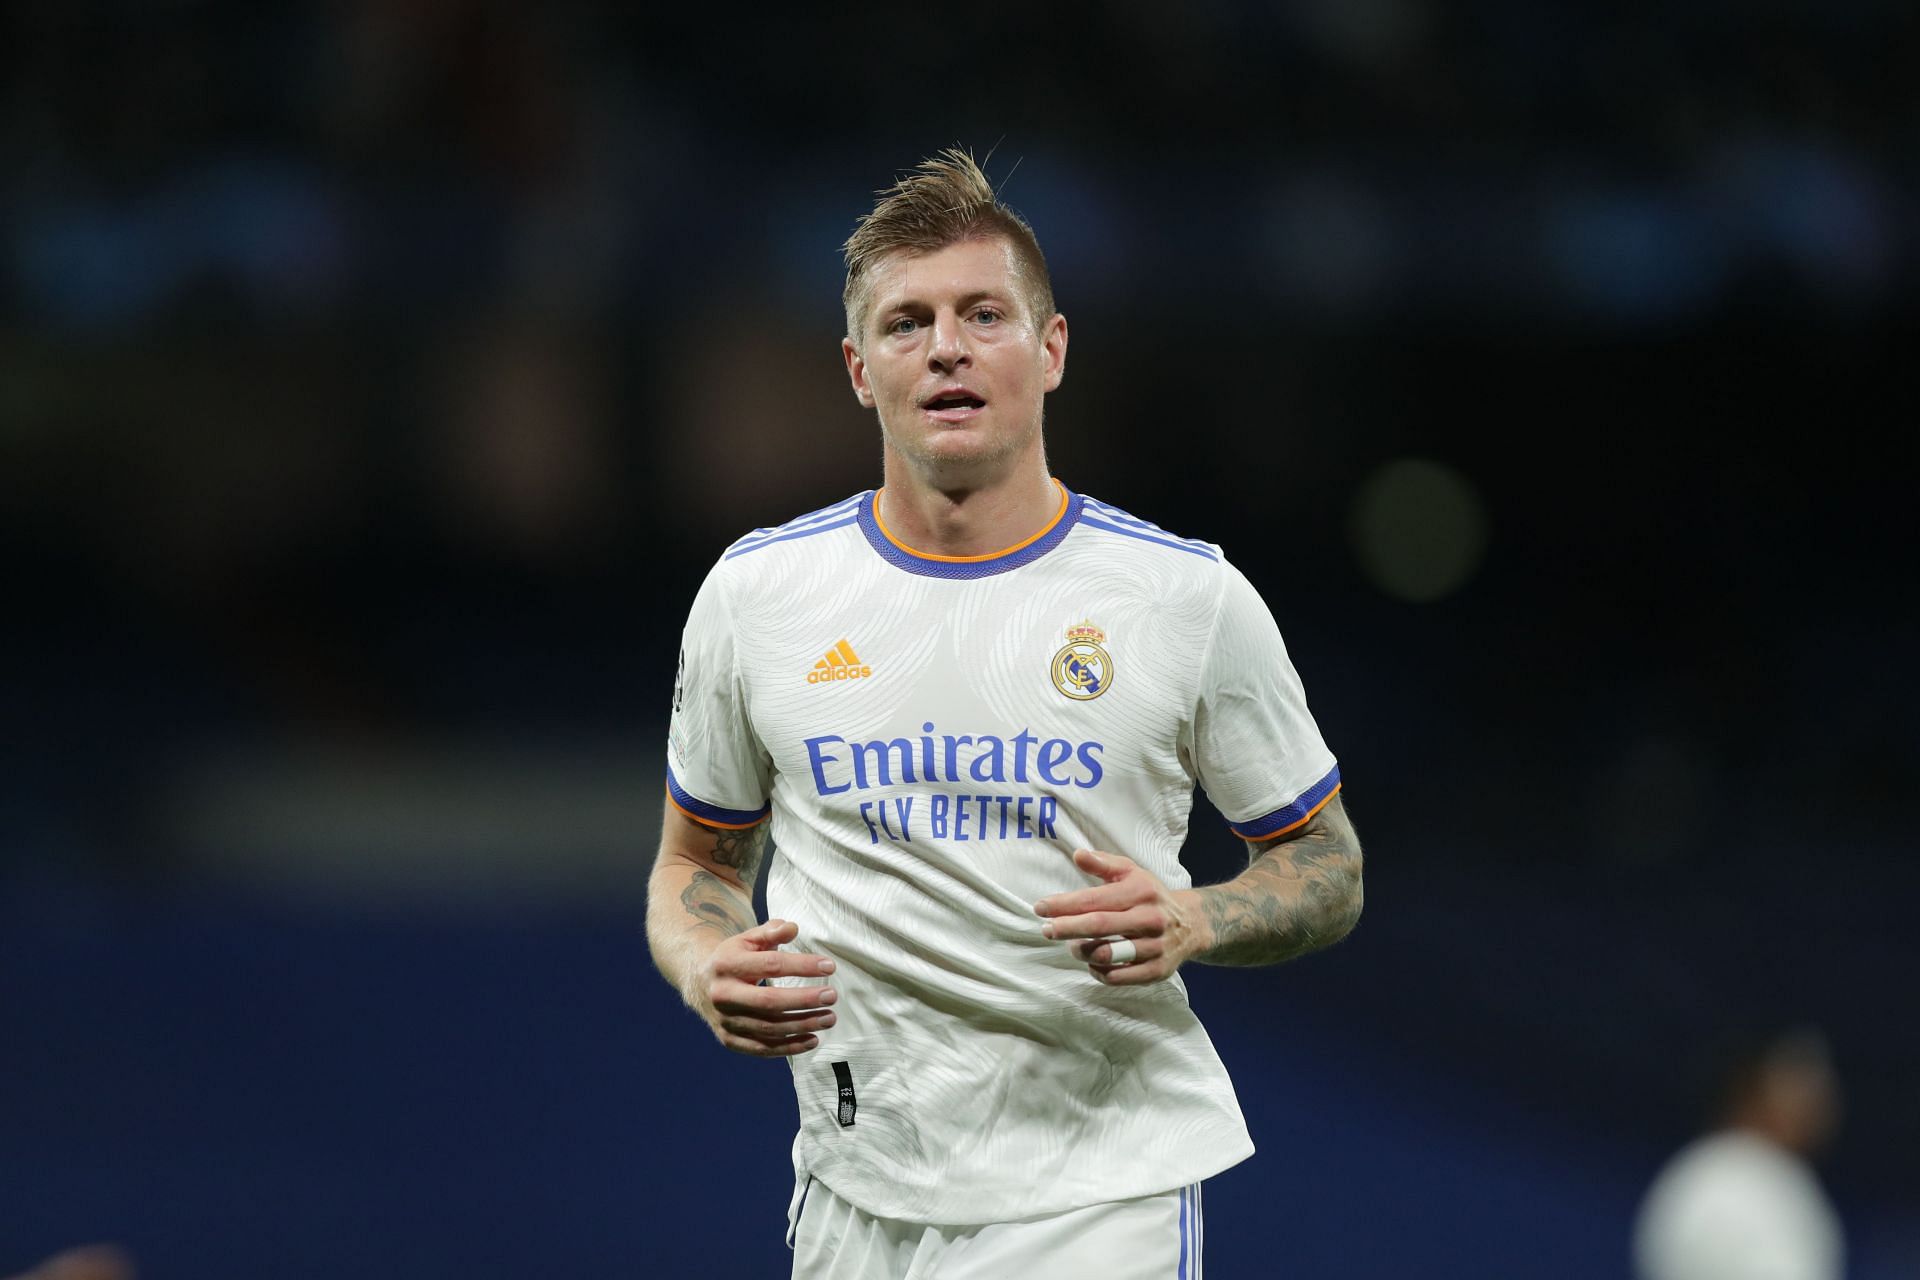 Kroos is looking forward to facing PSG in the Champions League.